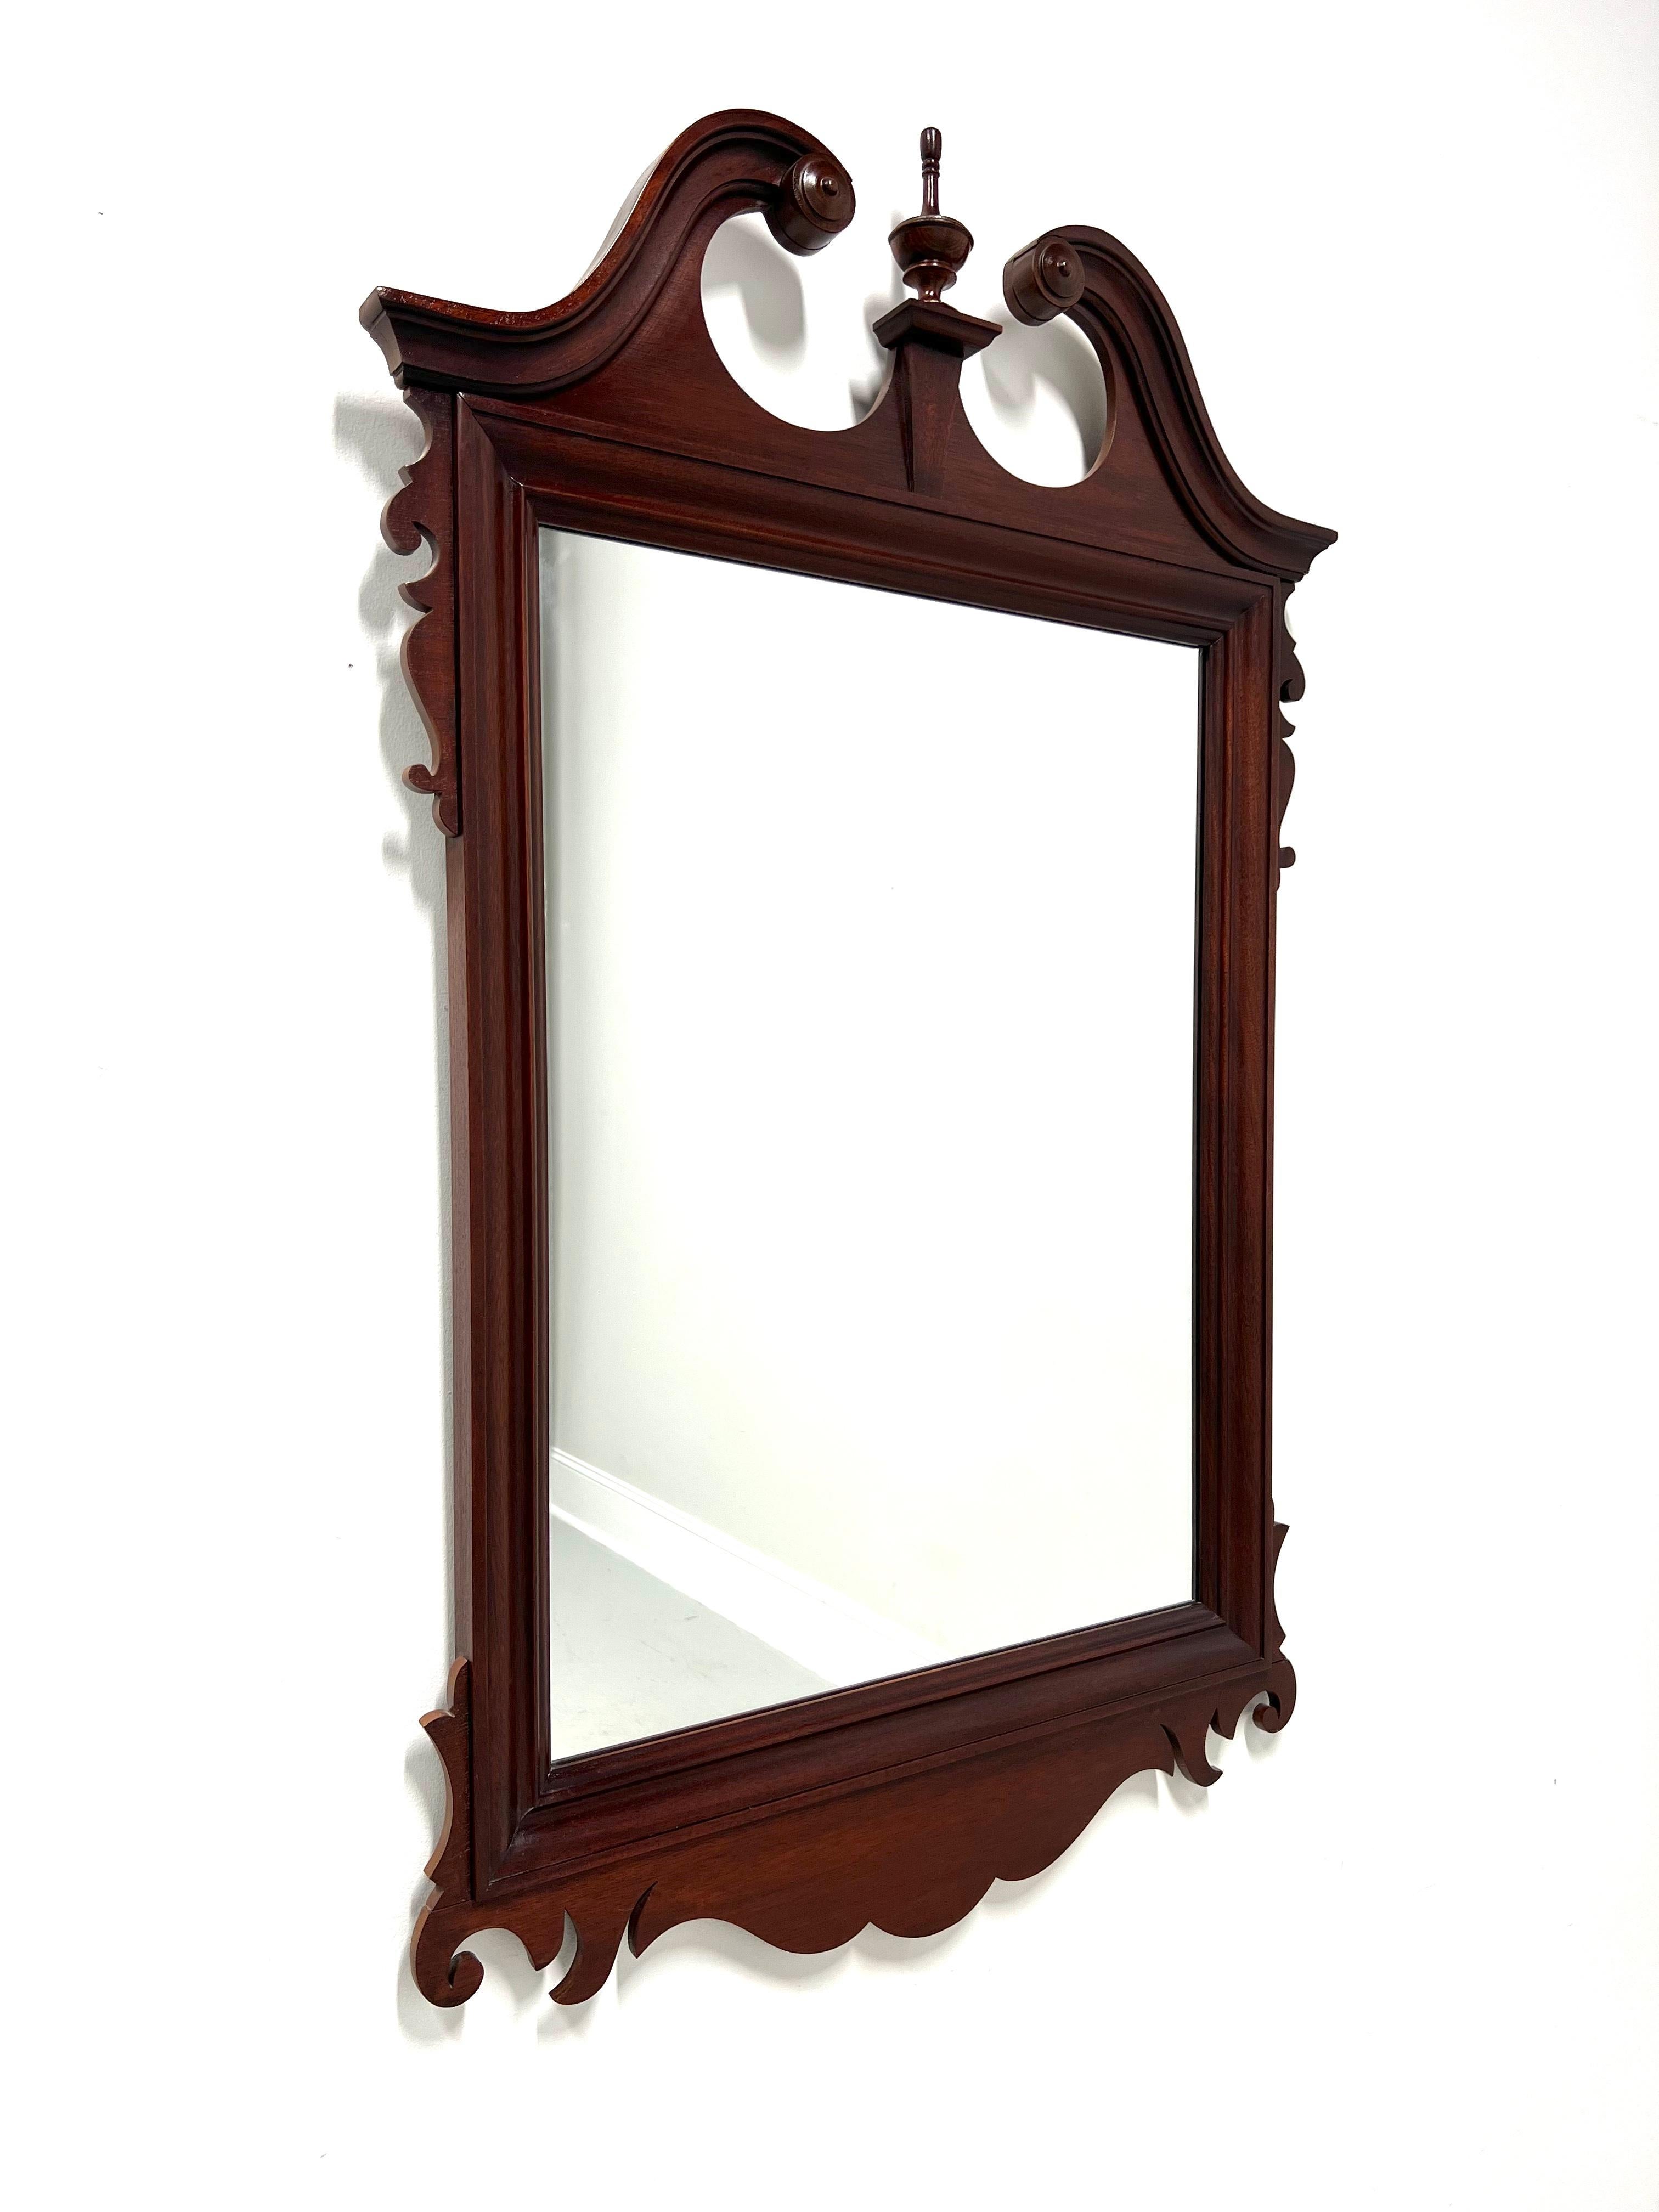 A Chippendale style wall mirror by Dixie Furniture. Mirrored glass in a mahogany frame with pediment top, a center finial, and decorative carvings at top sides & at the bottom. Made in Lenoir, North Carolina, USA, in the late 20th Century.

Style #: